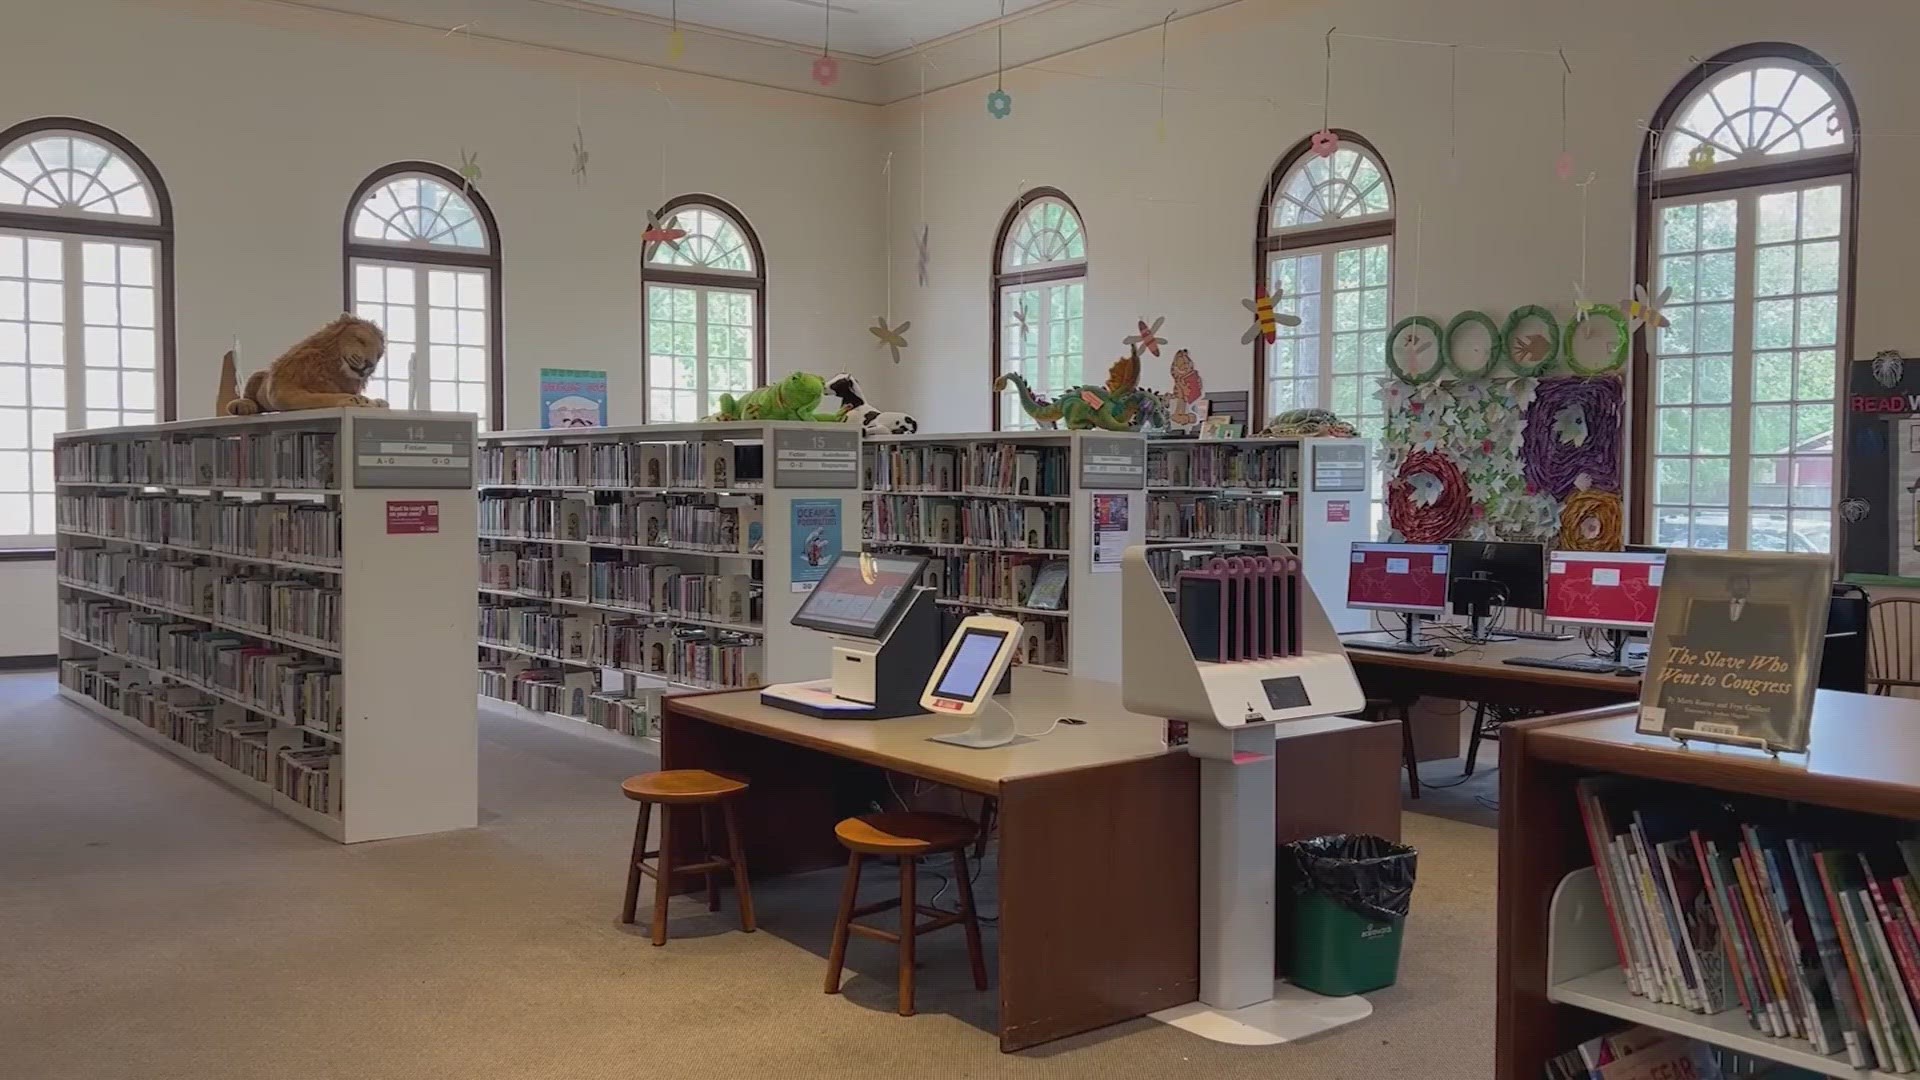 Some libraries will be turned into "team centers" where students who were removed from class due to behavioral issues will be placed to watch their class virtually.